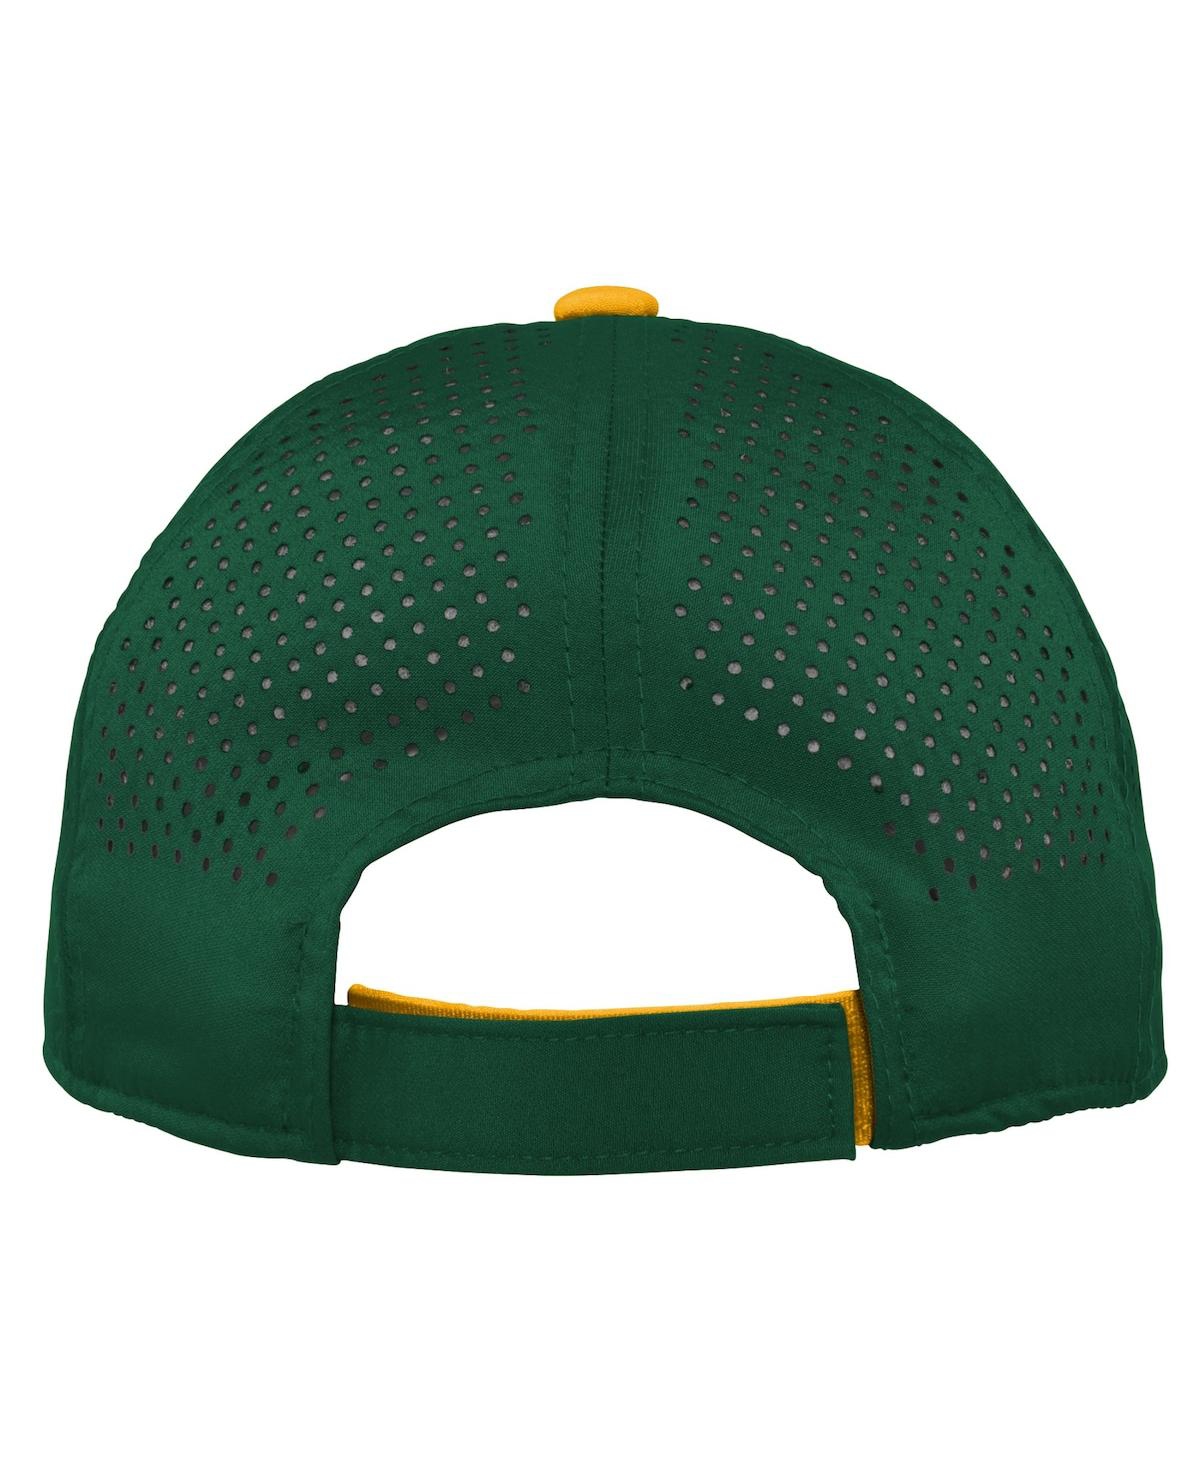 Shop Outerstuff Youth Boy's And Girls Green Green Bay Packers Tailgate Adjustable Hat